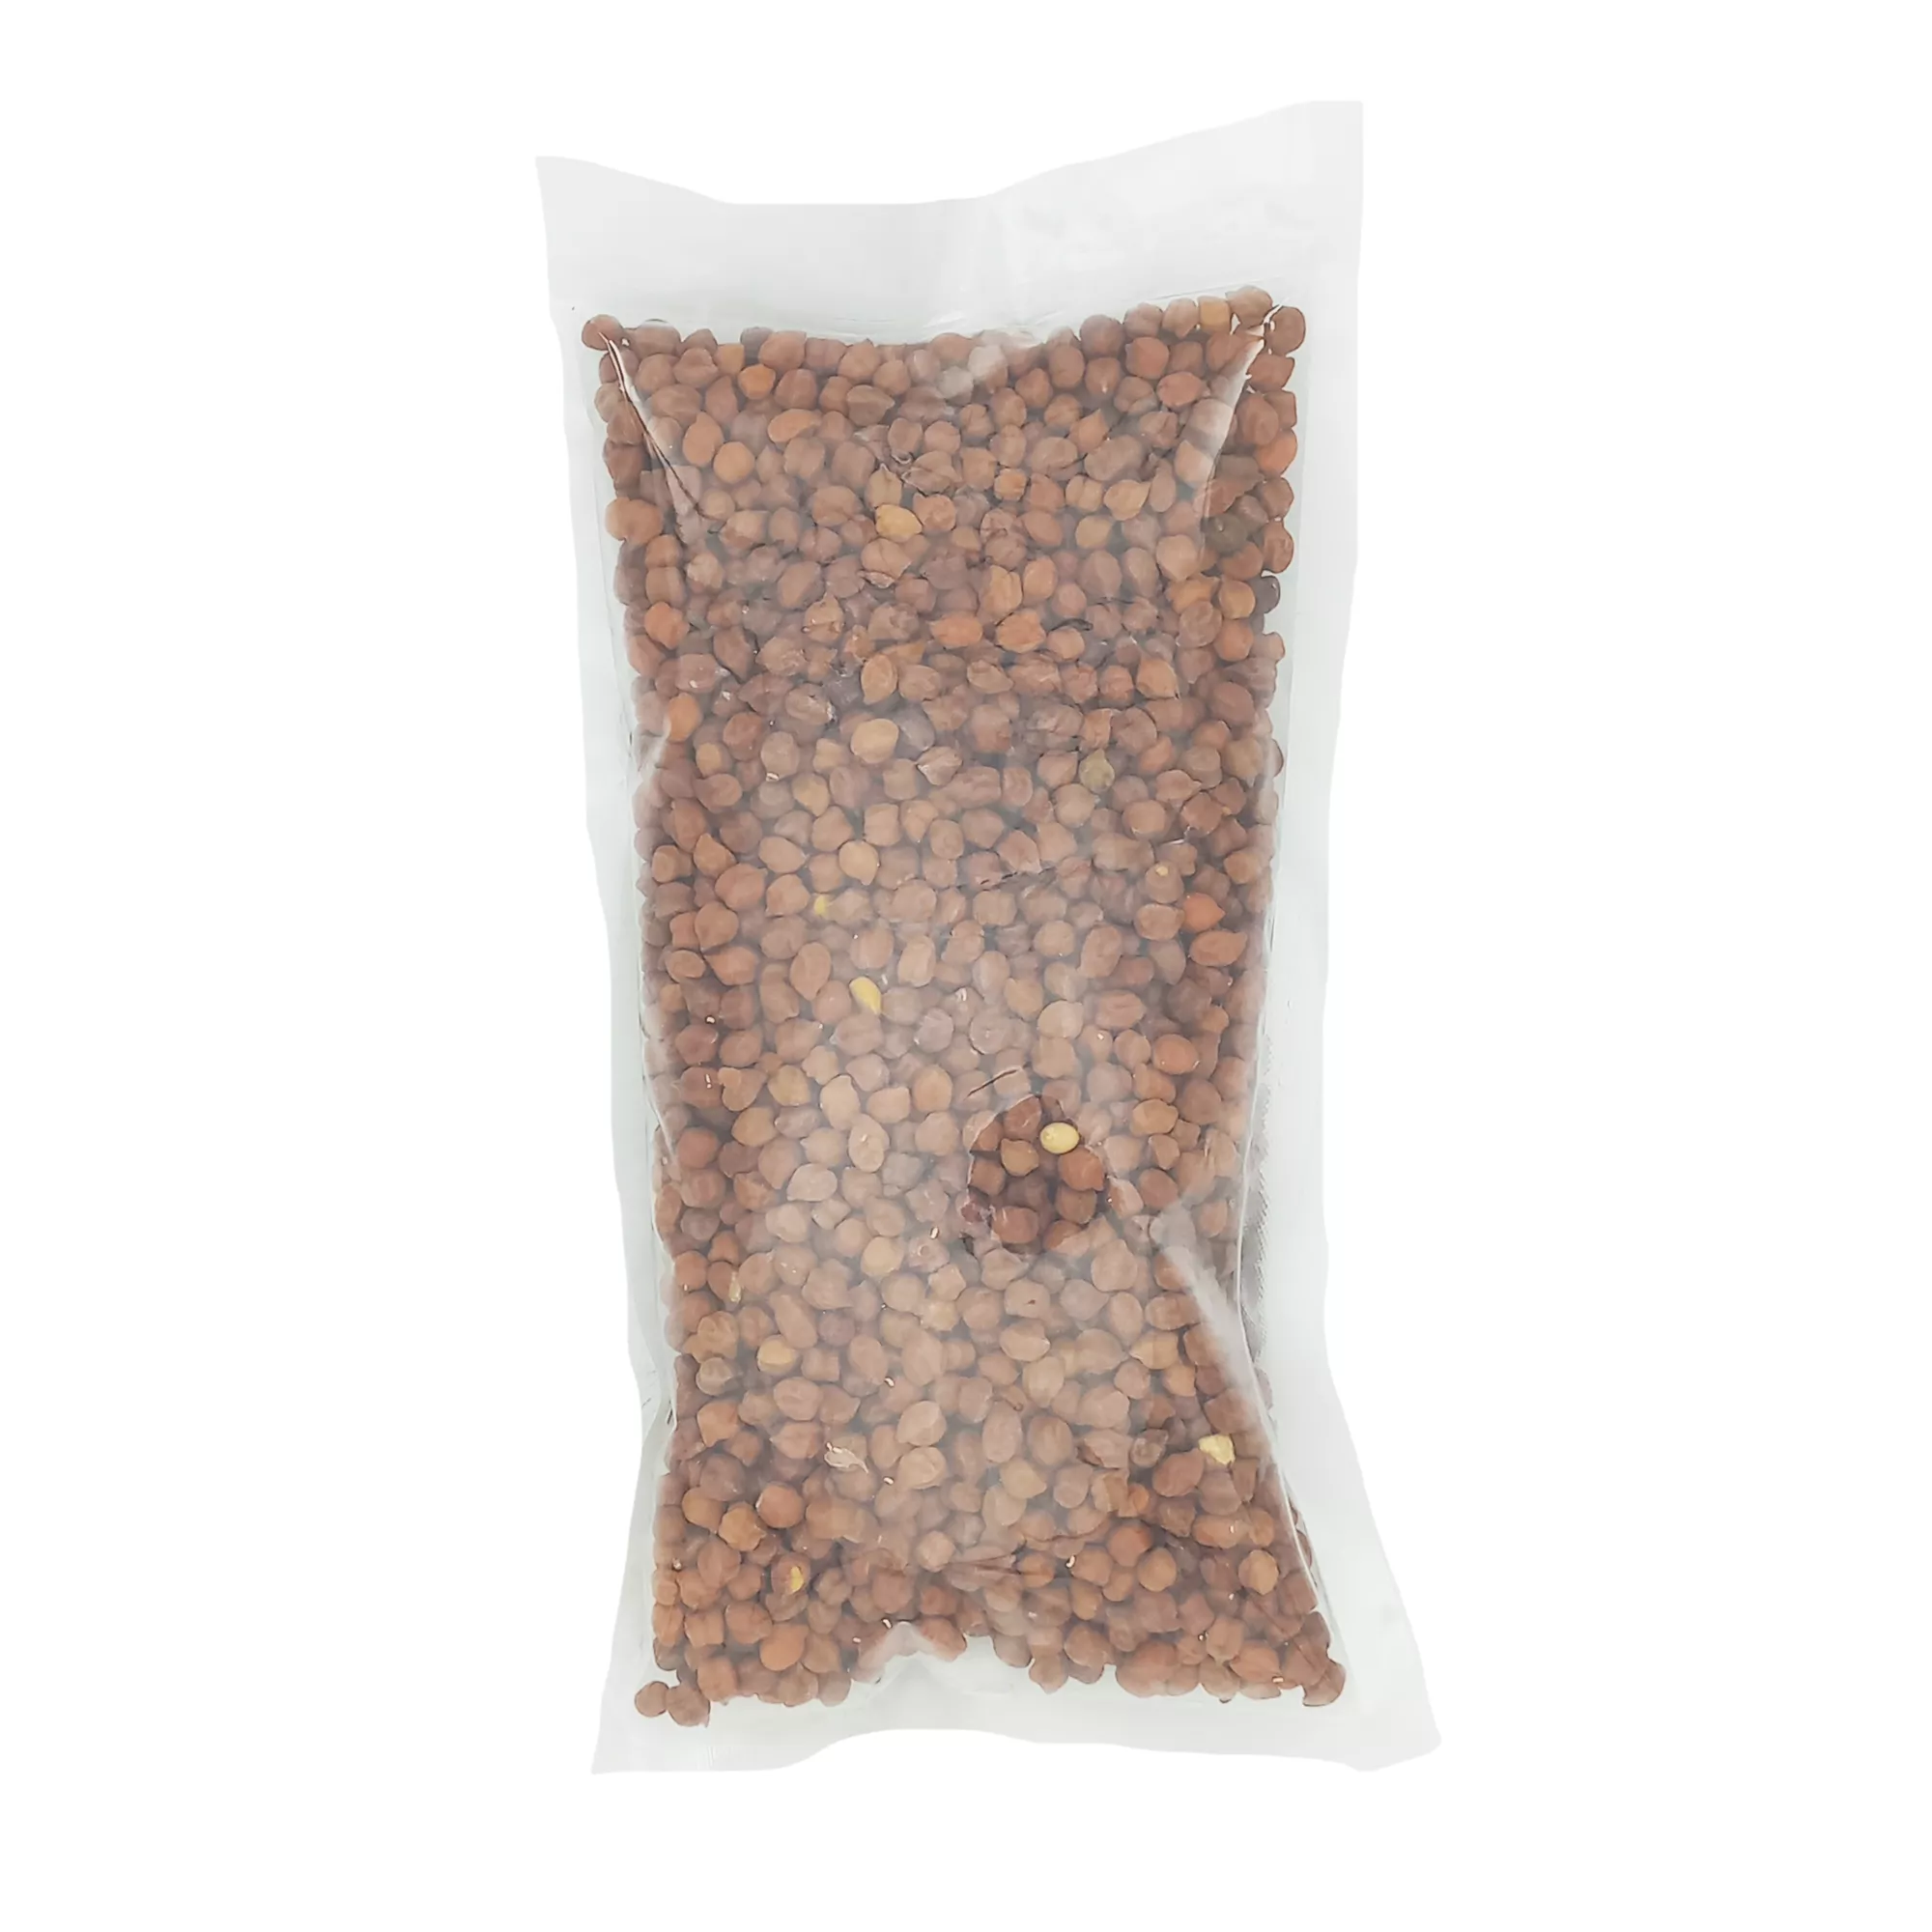 Brown Chickpeas Little India 500g